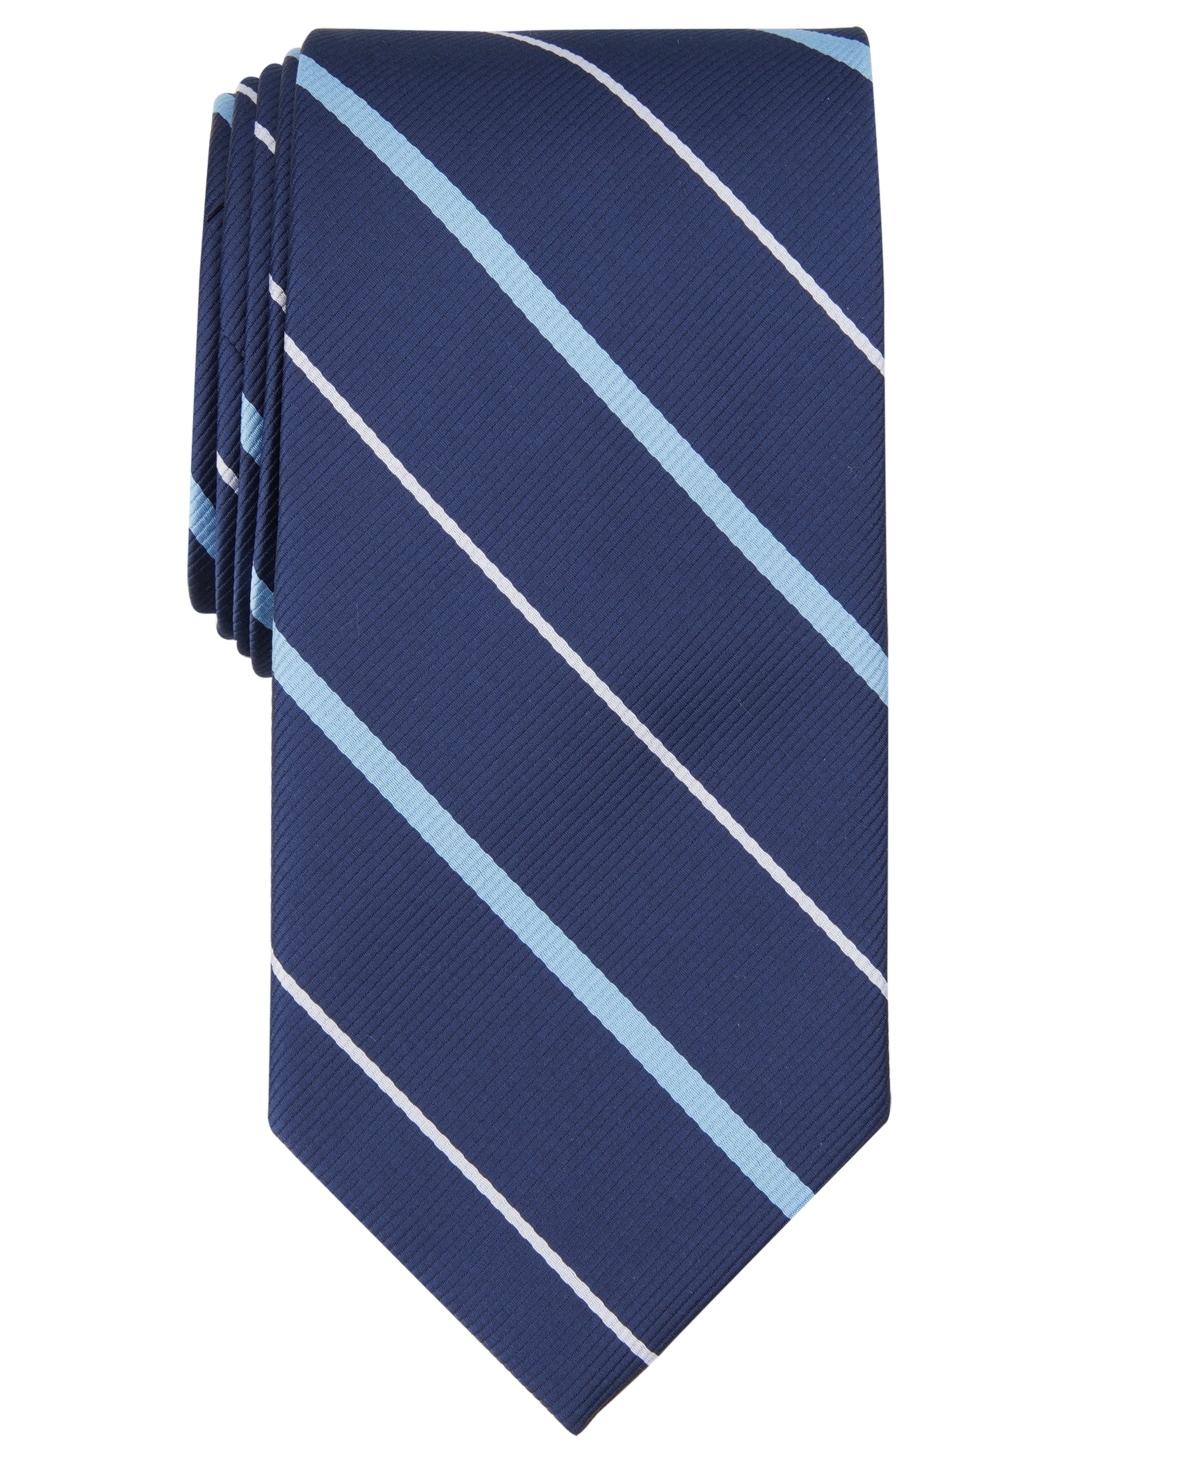 Men's Cowan Stripe Tie, Created for Macy's - Taupe